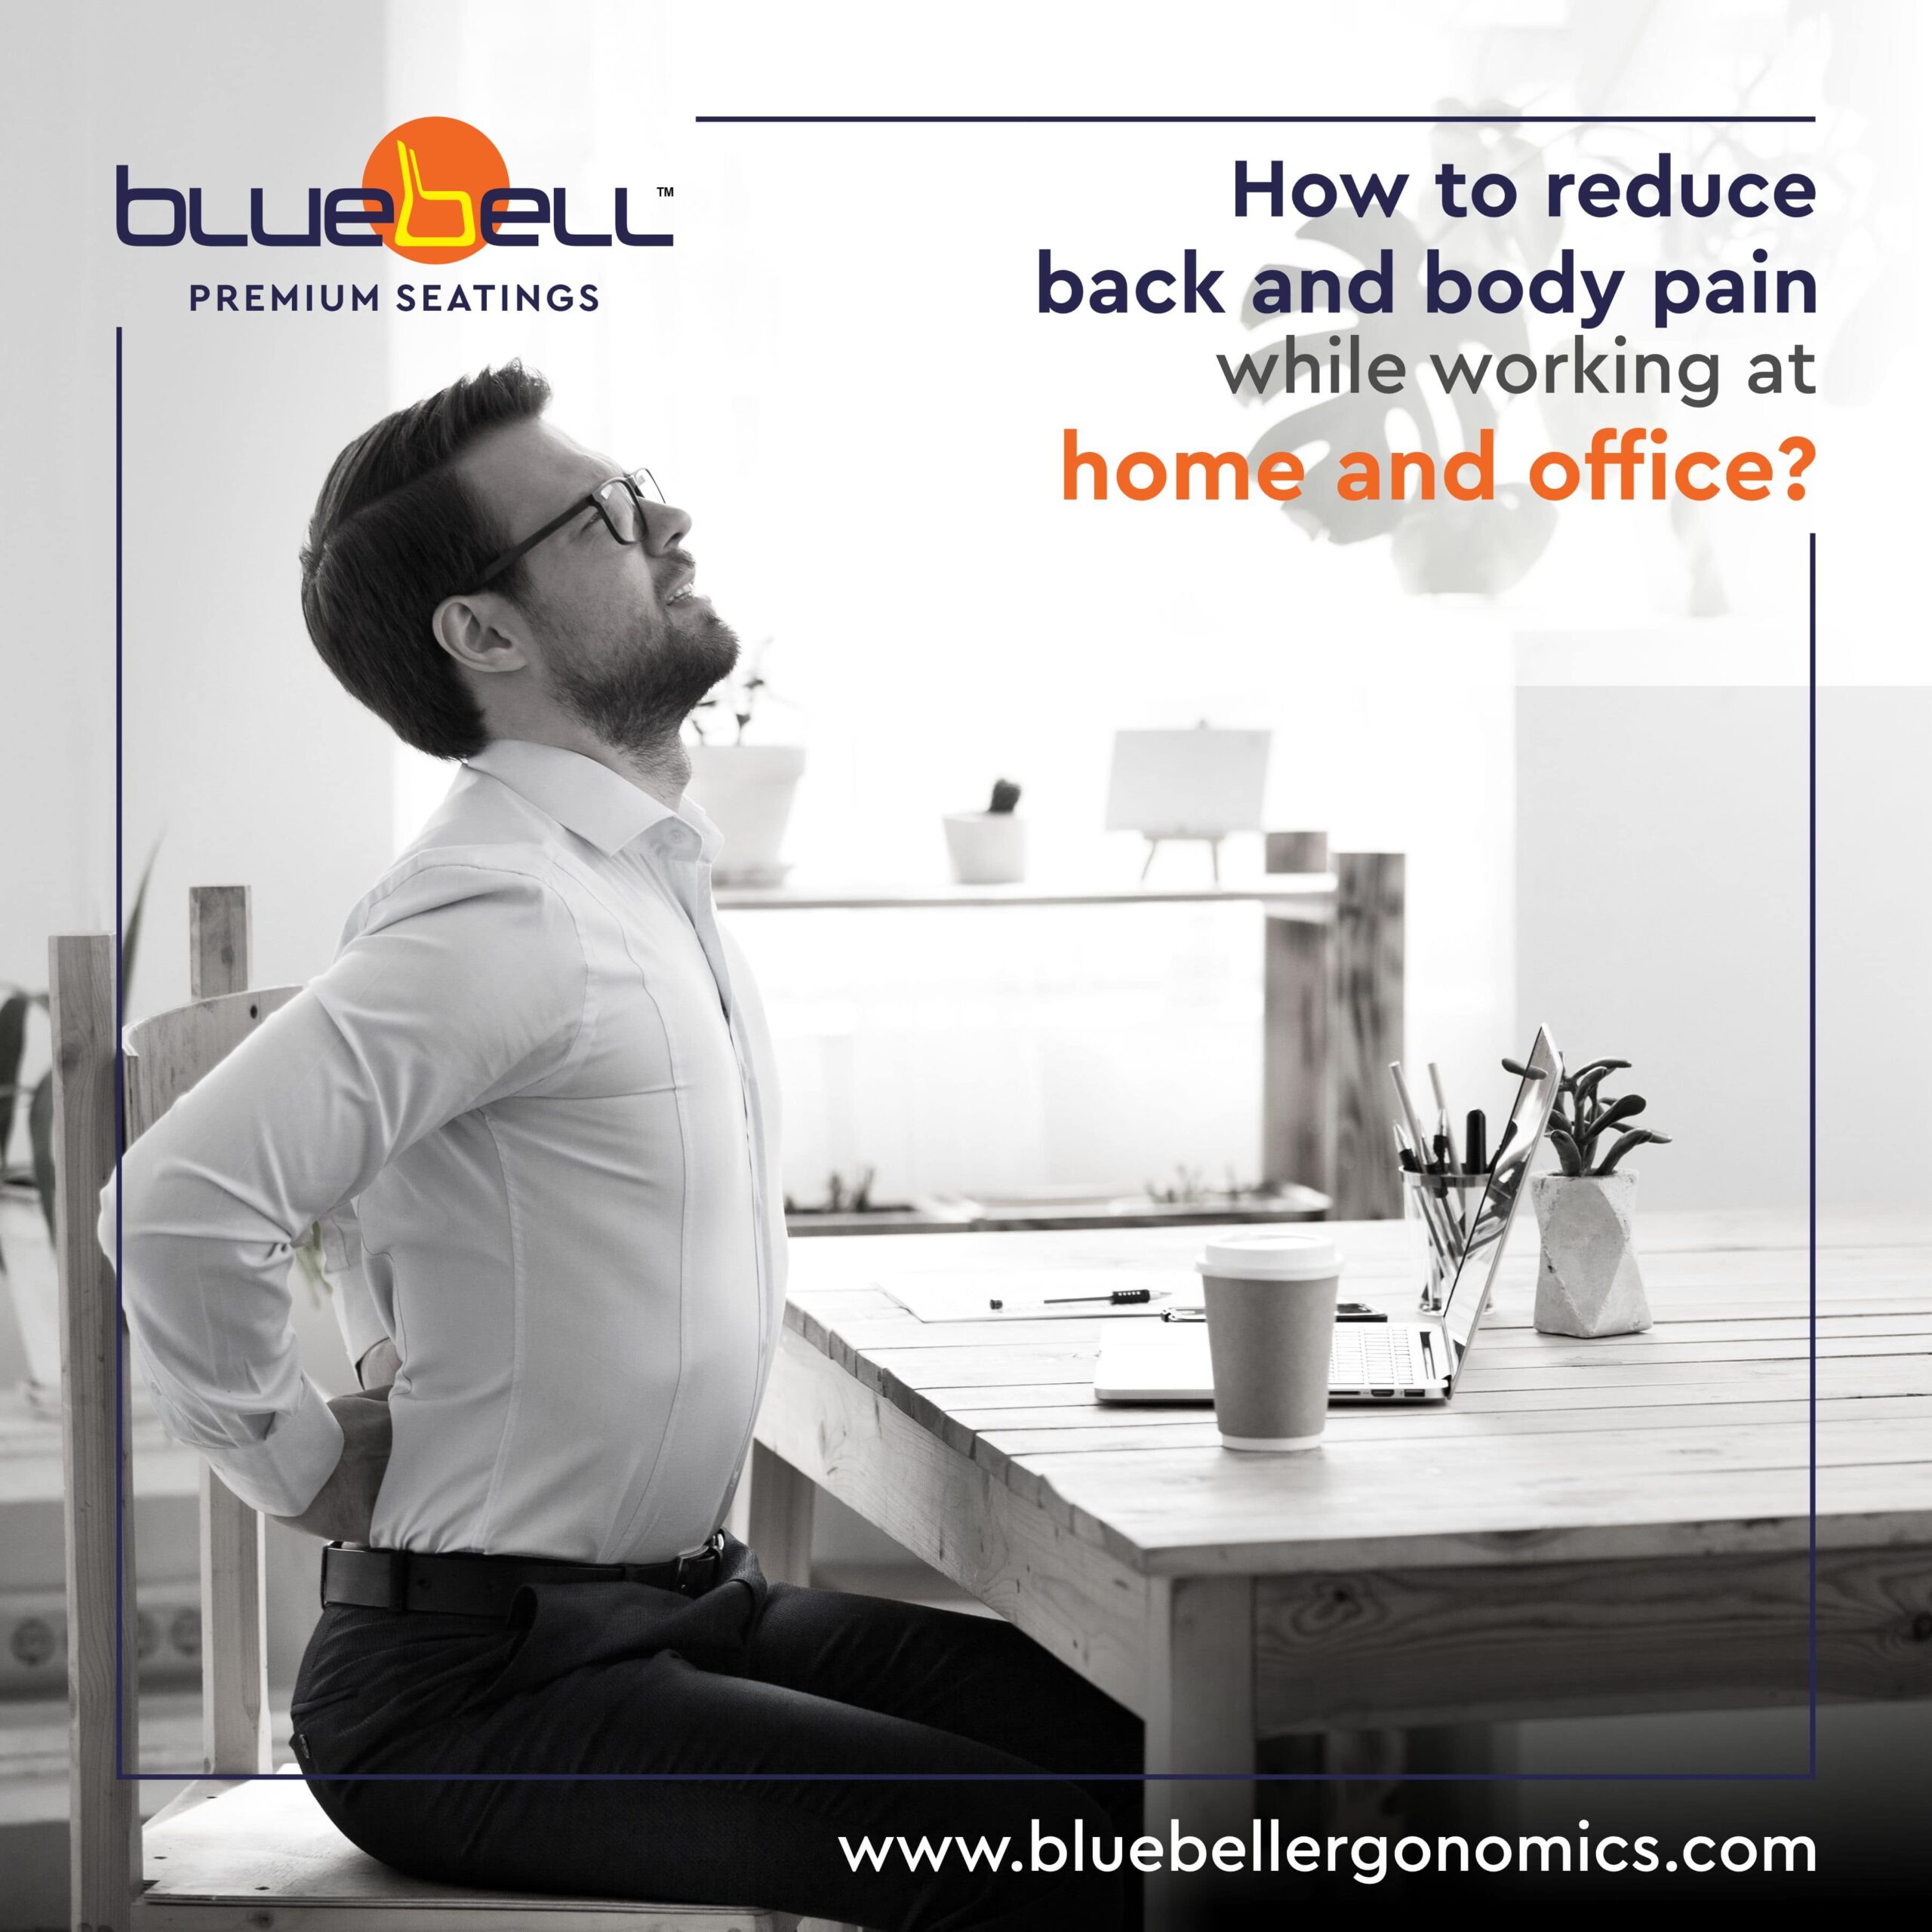 How to reduce back pain while working at home and office